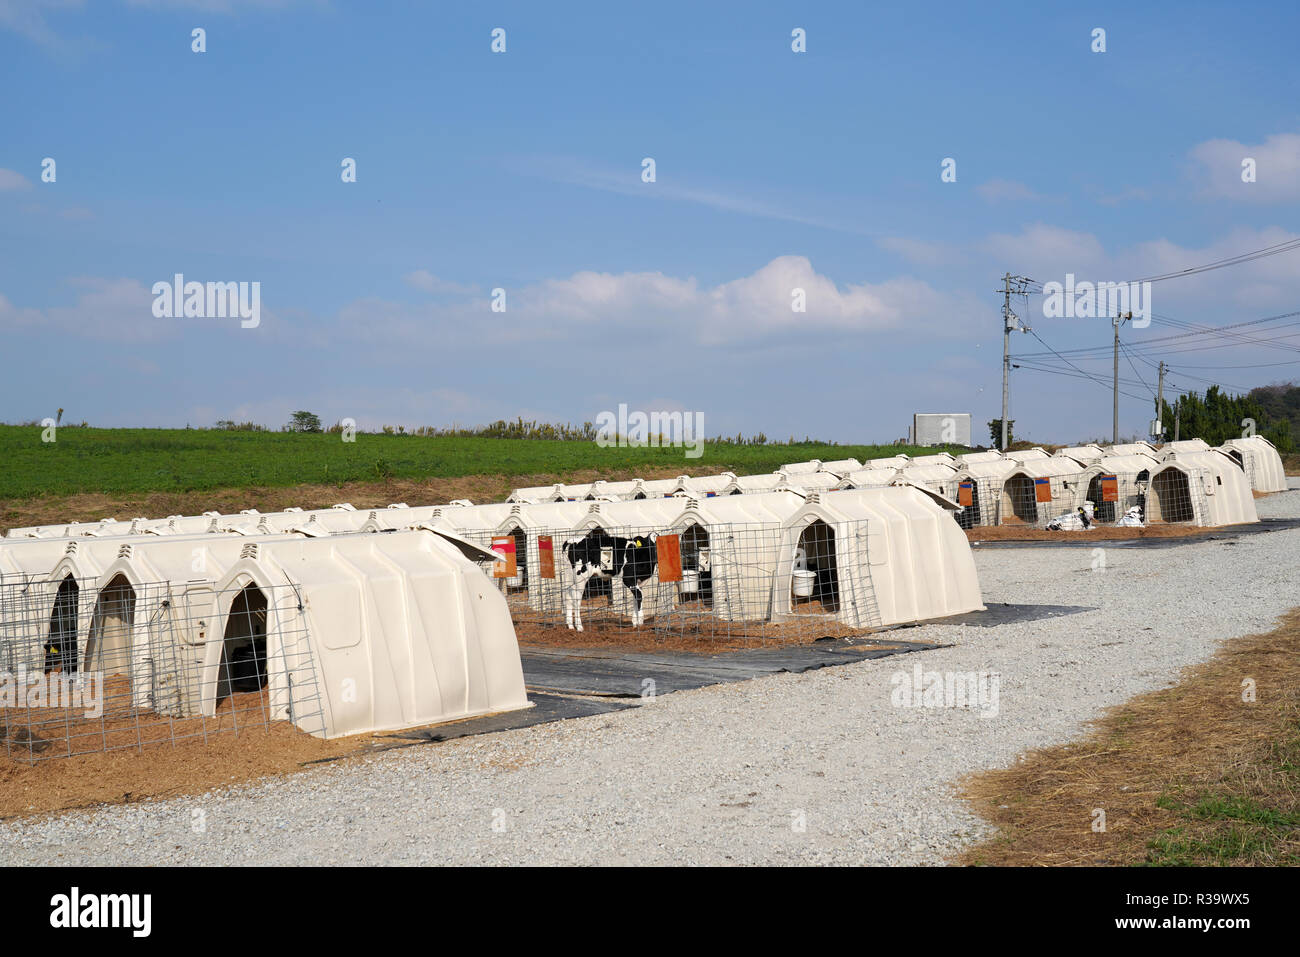 Row of corral for little calf, cow farm, dairy business Stock Photo